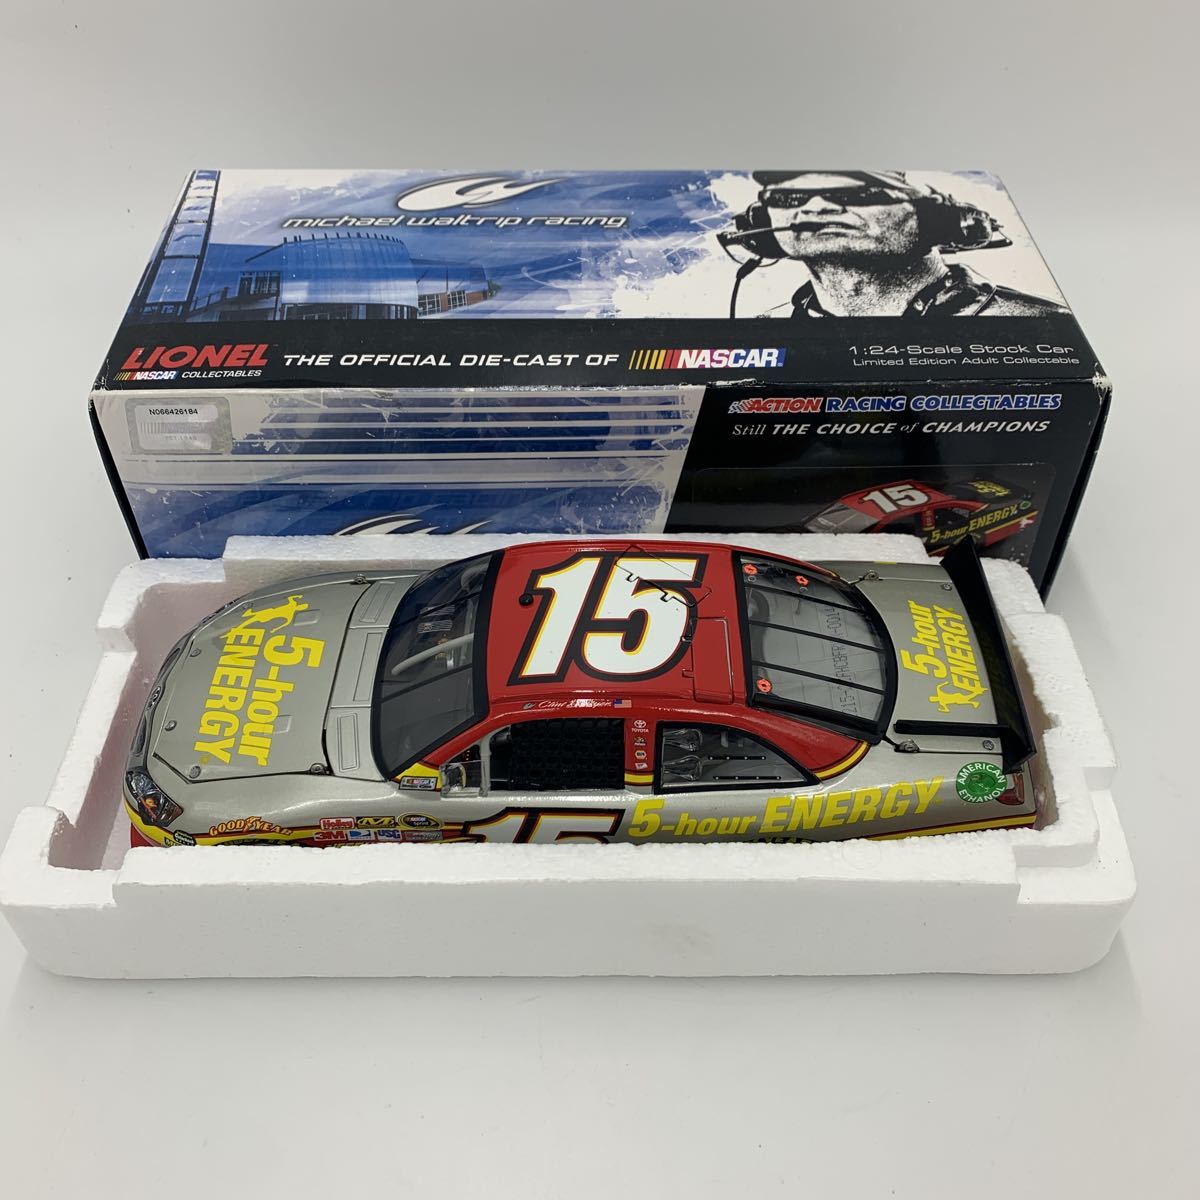 LIONEL NASCAR COLLECTABLES 1:24-scale stock car Clint Bowyer #15 Hour Energy 2012 Camry ナスカー　ライオネル　送料無料